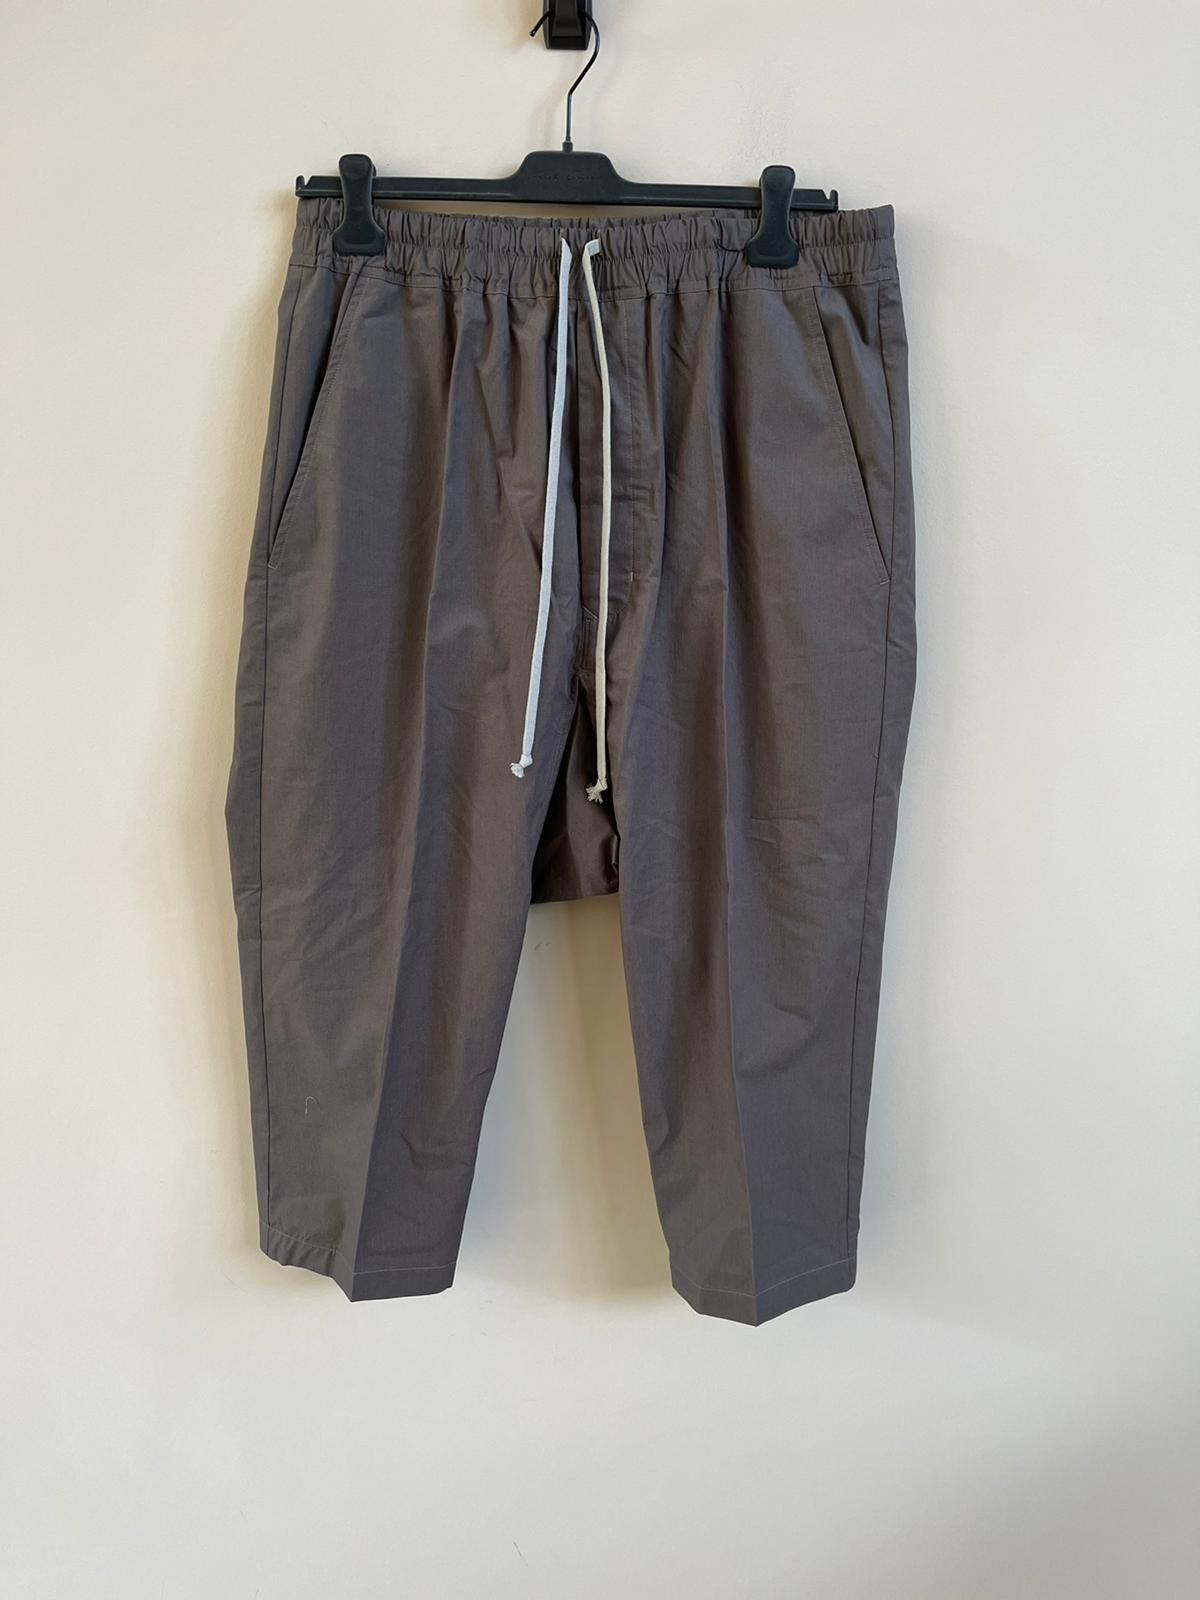 Rick Owens Drawstring Cropped Cargo Pants in Dust Color | Grailed